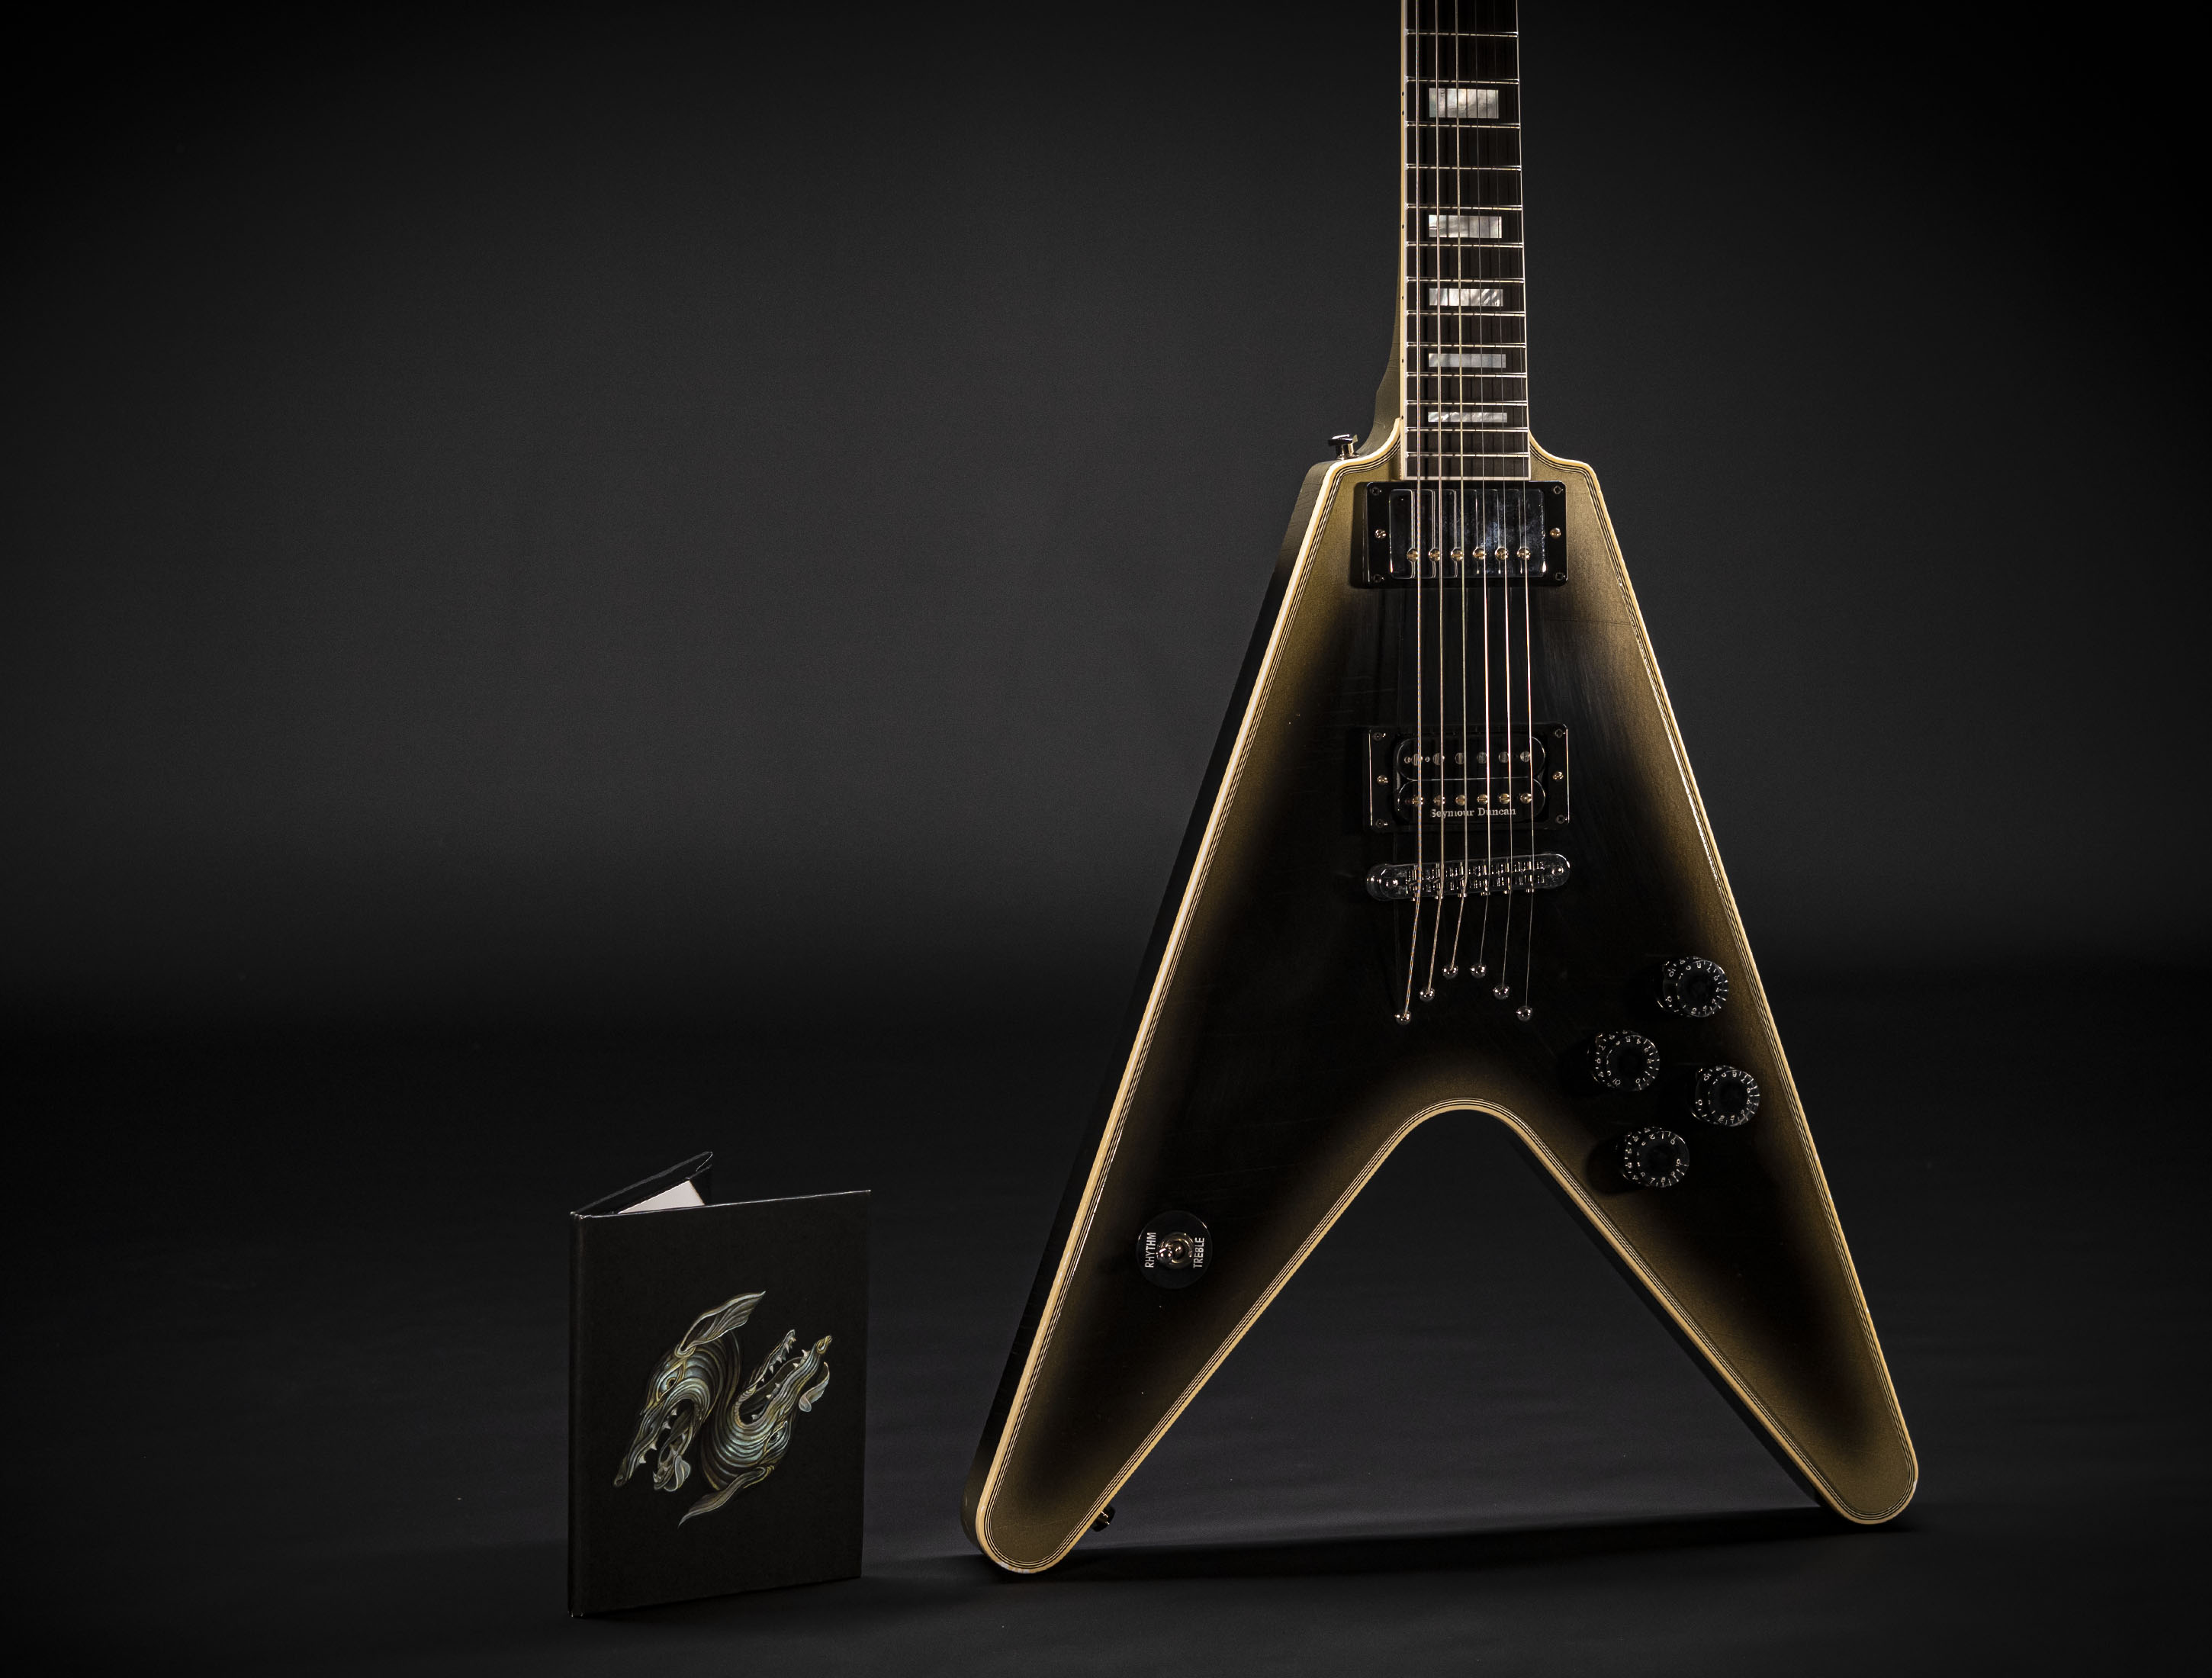 Gibson Adam Jones Flying V Collector's Edition - handsigned Photo by AJ